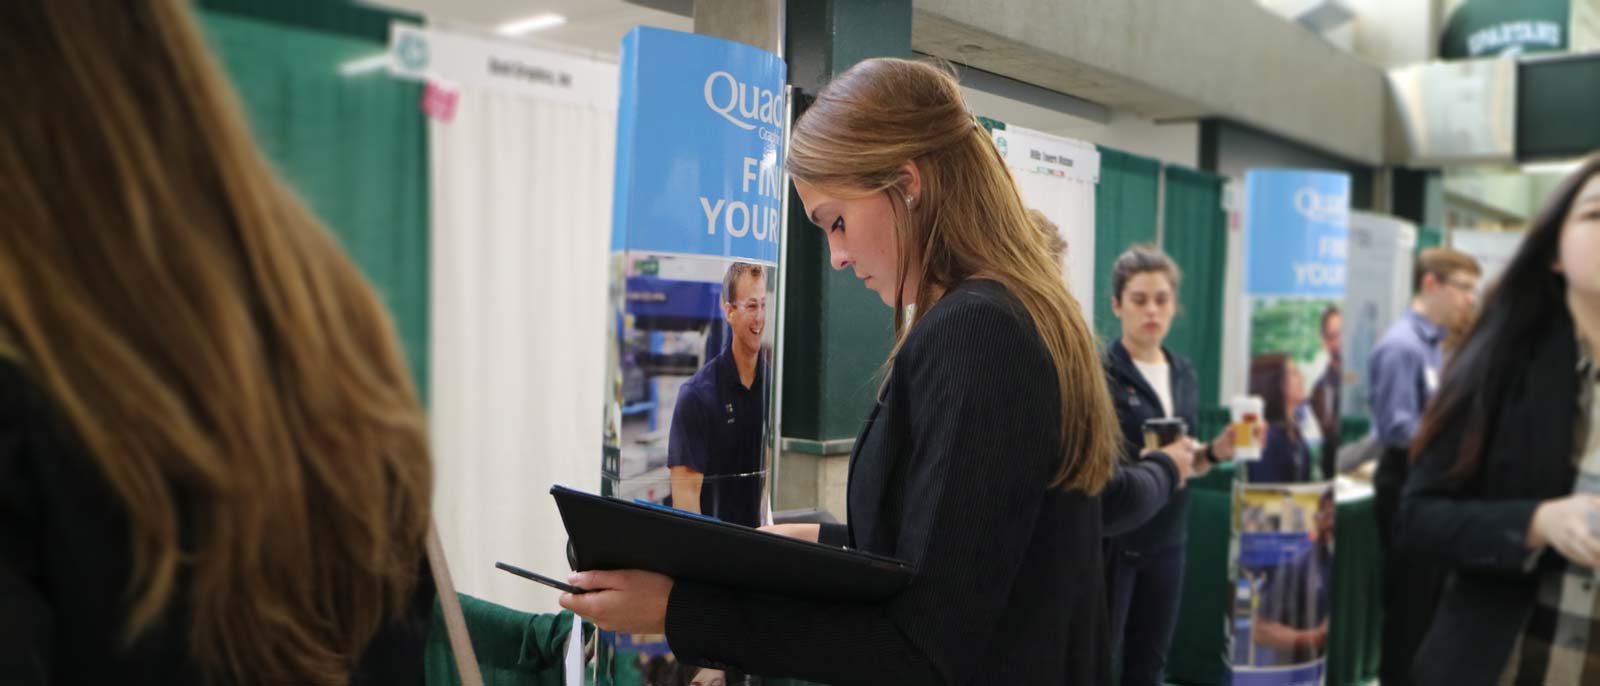 Female student dressed business professional looks down at a notebook while standing int eh concourse at the Breslin Student Events Center.